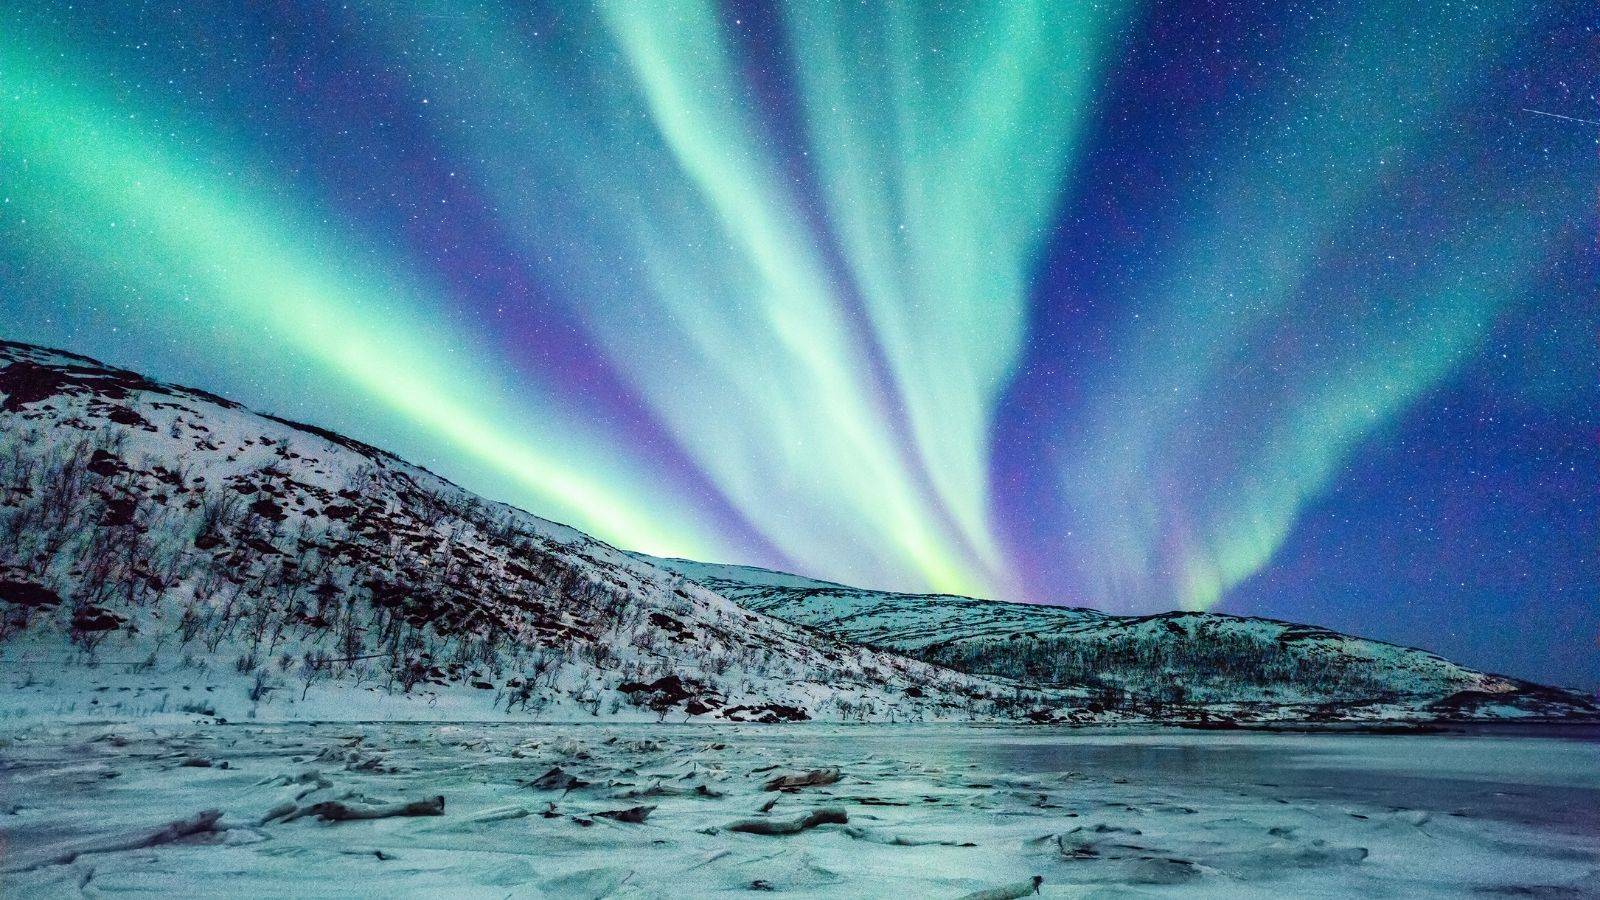 visit the Northern Light - Colours in the Northern Sky